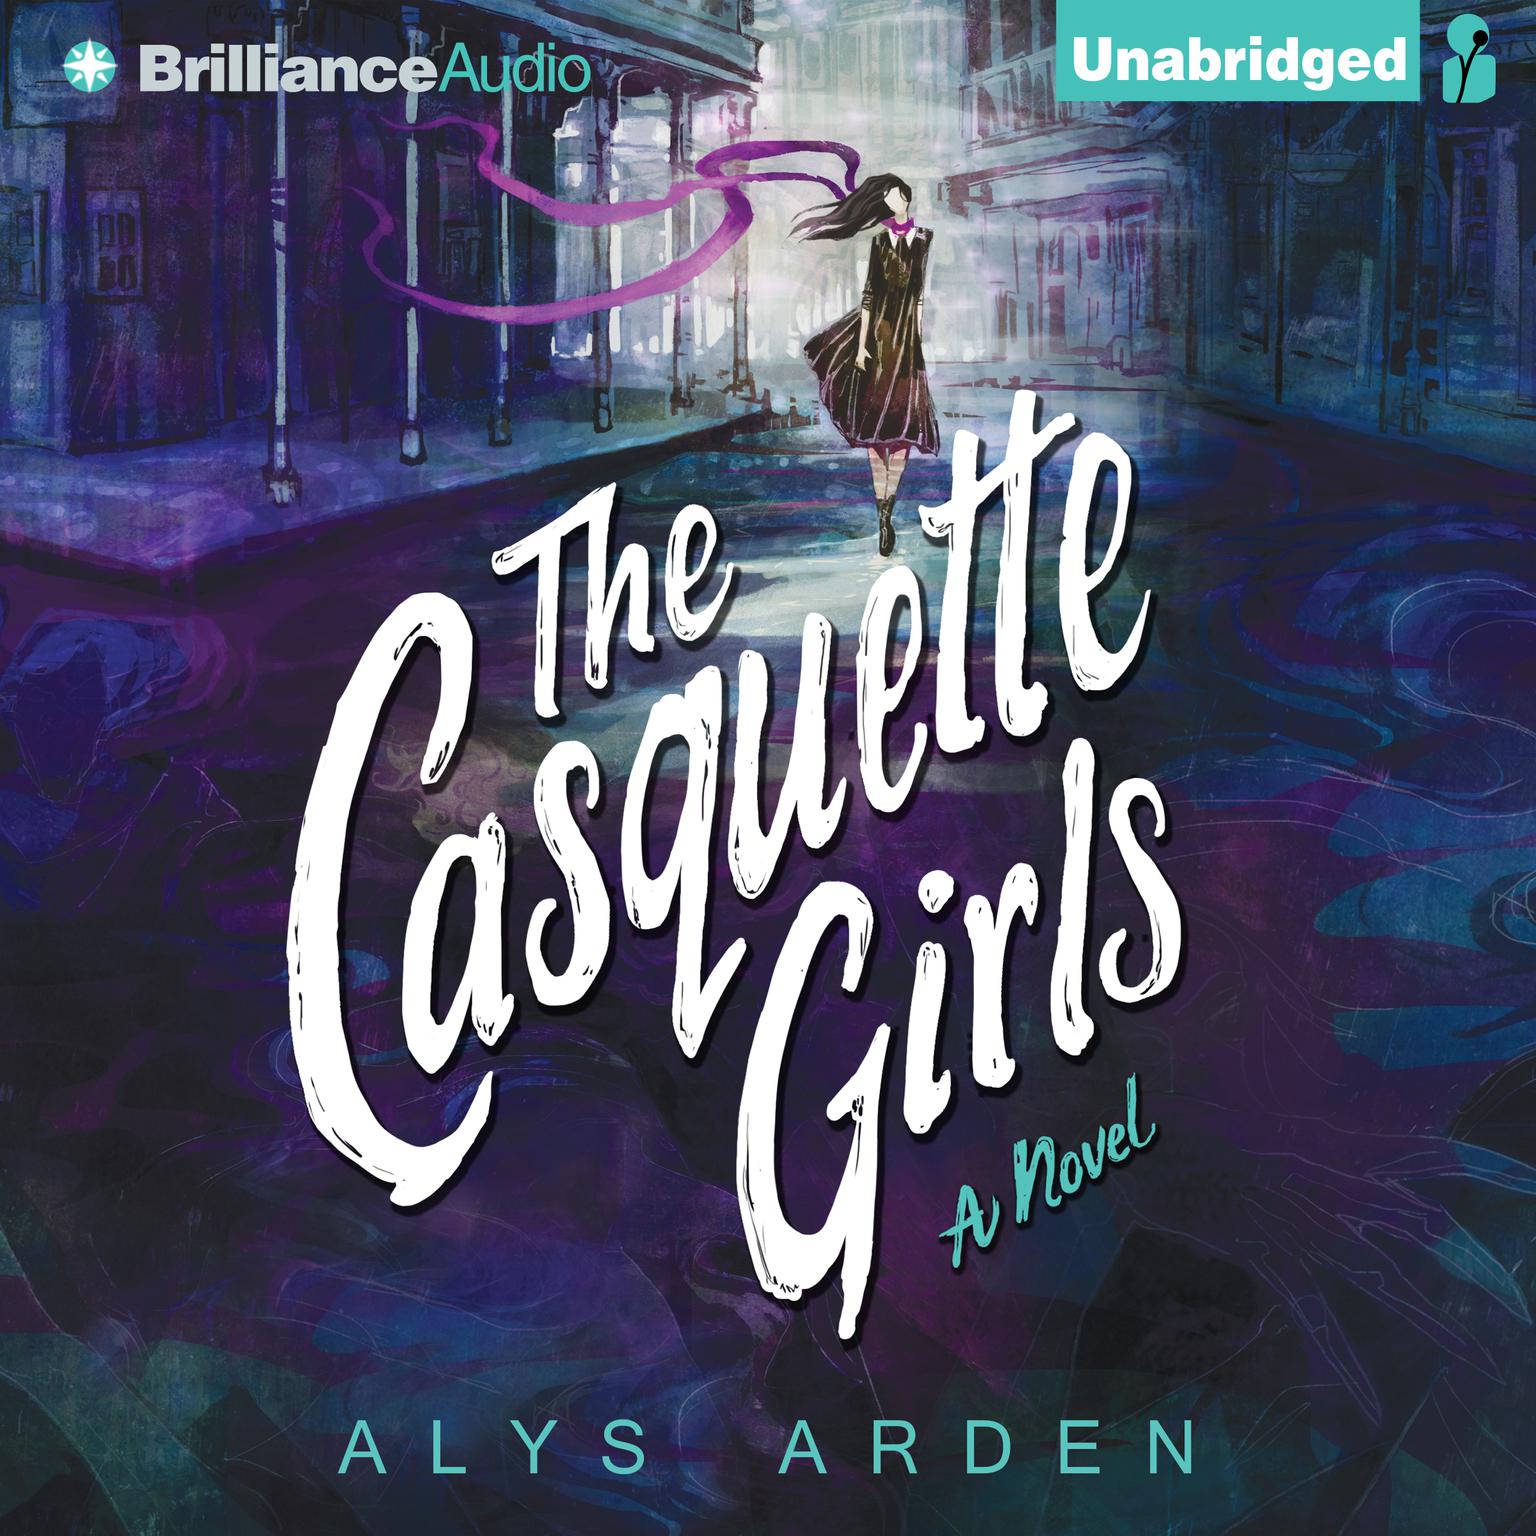 The Casquette Girls: A Novel Audiobook, by Alys Arden